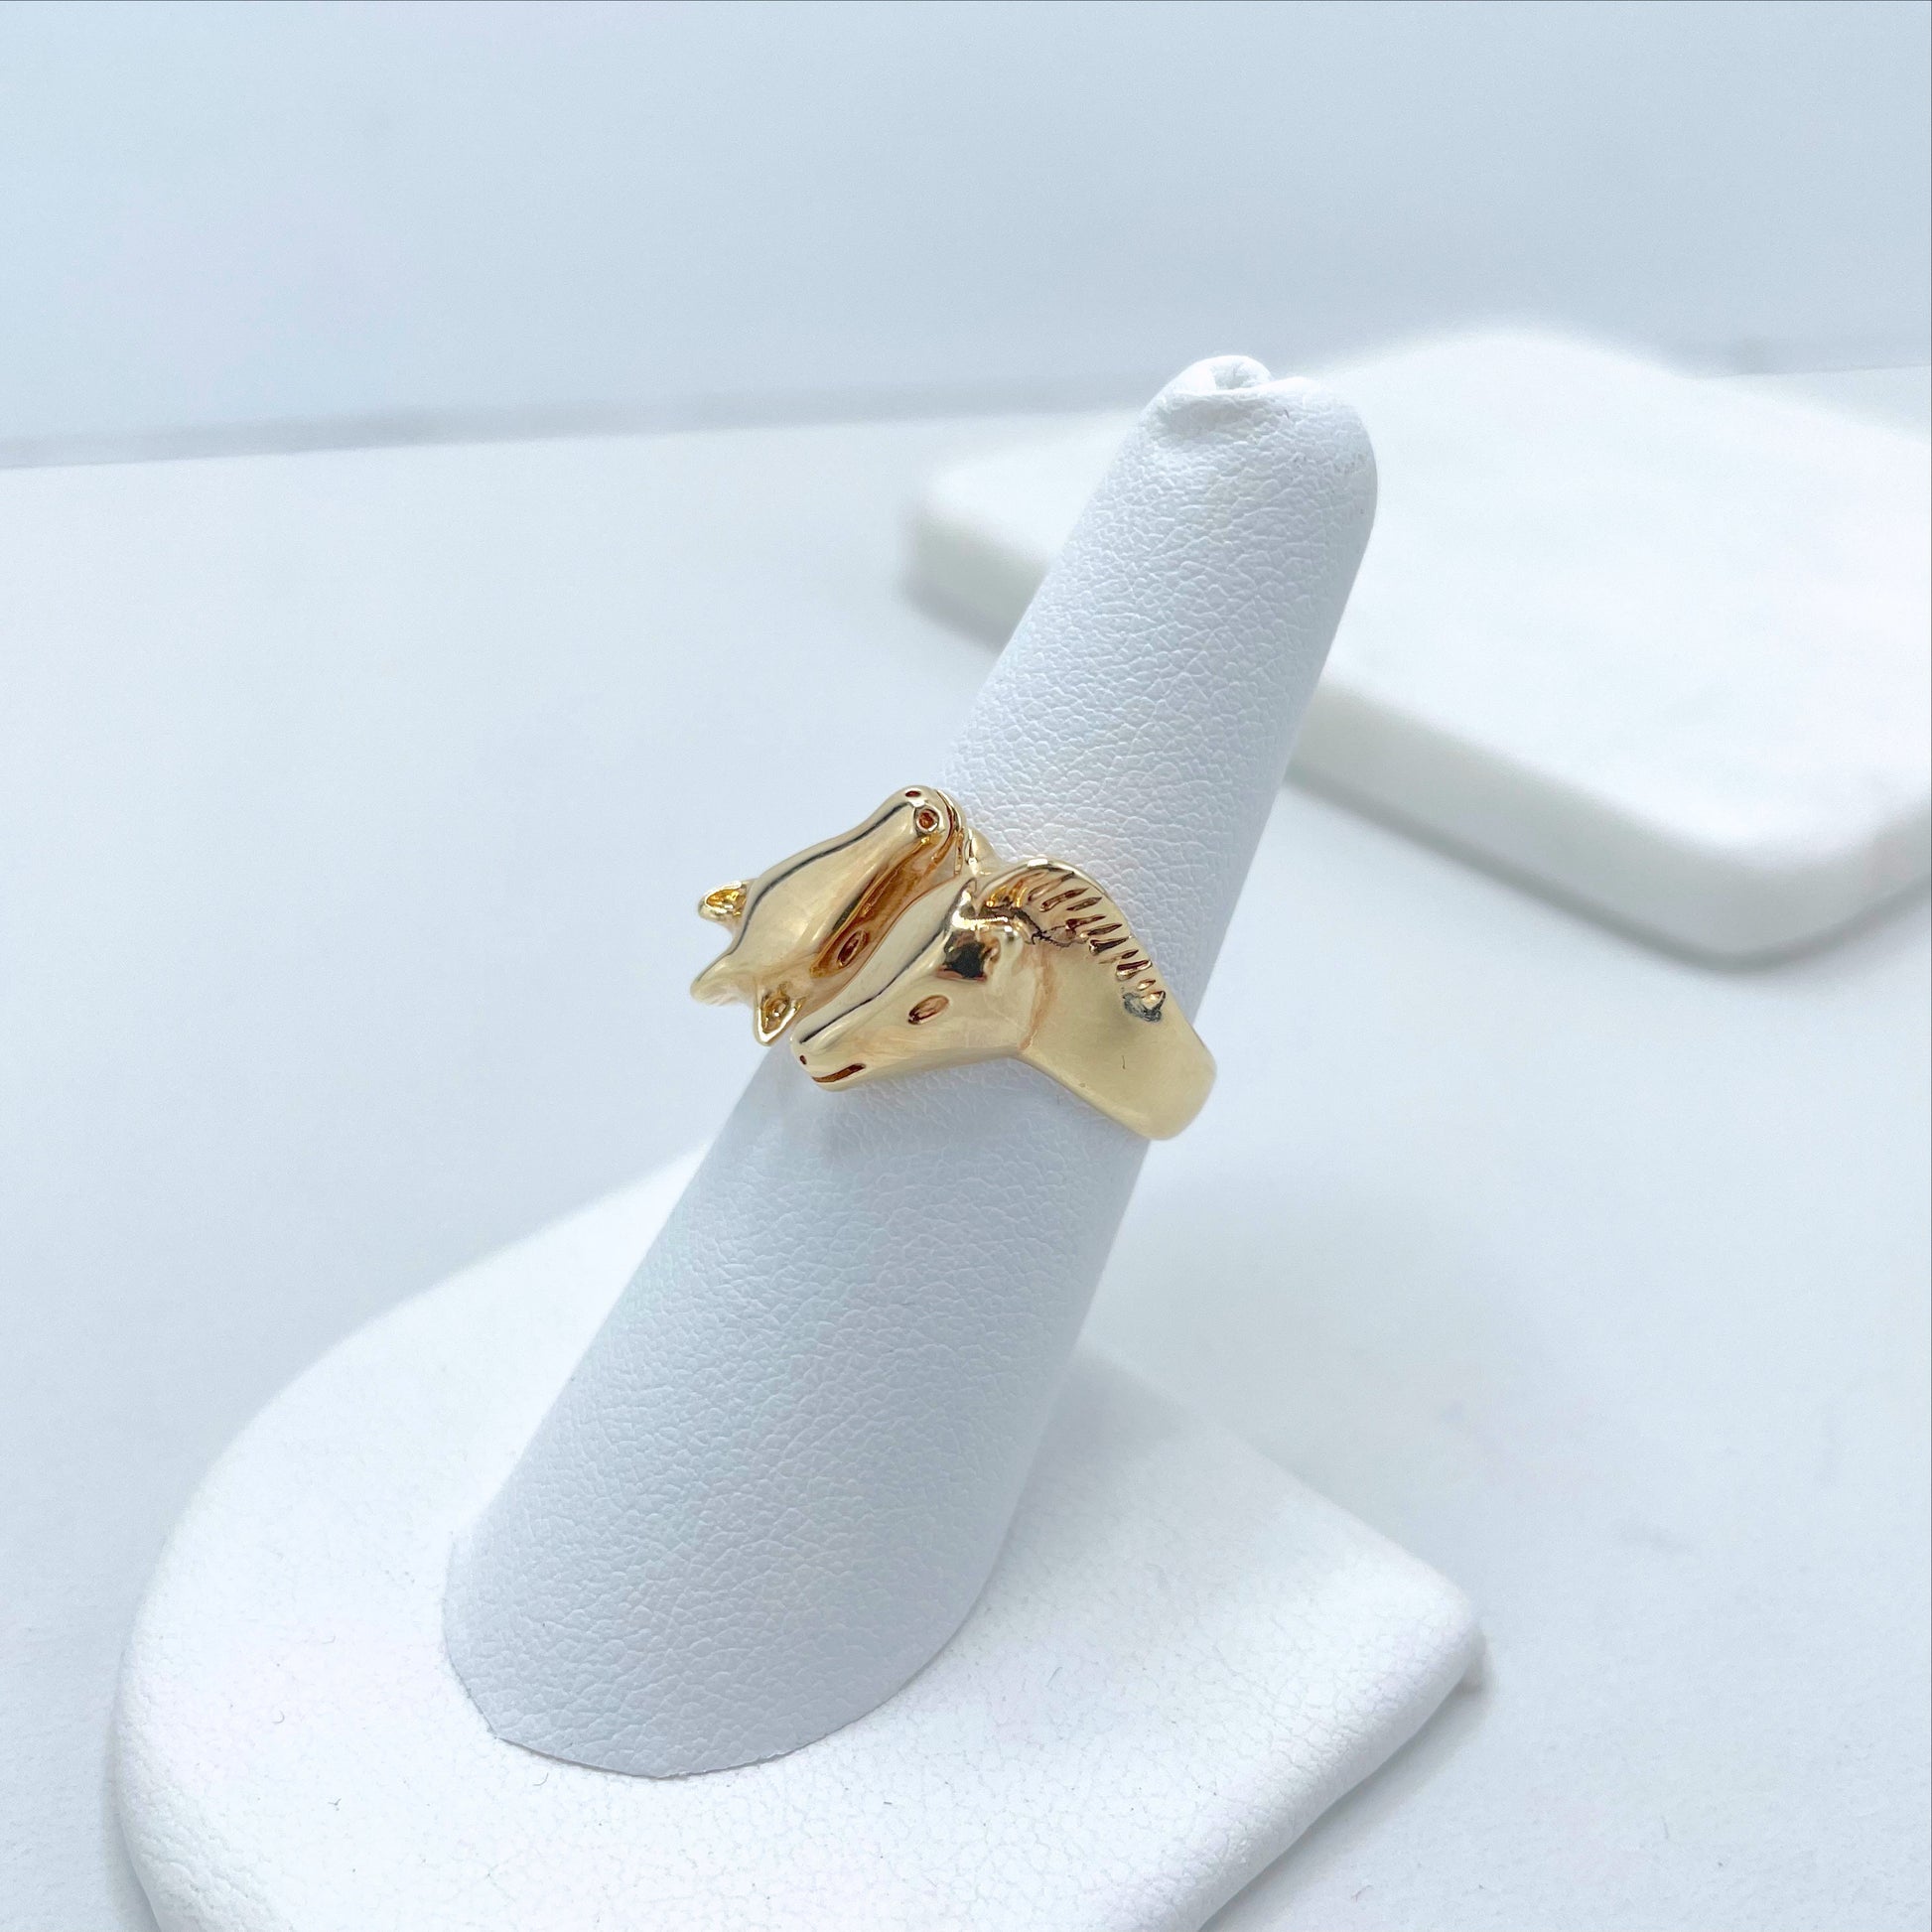 18k Gold Filled Puffed Two Head Horses Shape Adjustable Ring, Animals & Sports Jewelry, Wholesale Jewelry Making Supplies